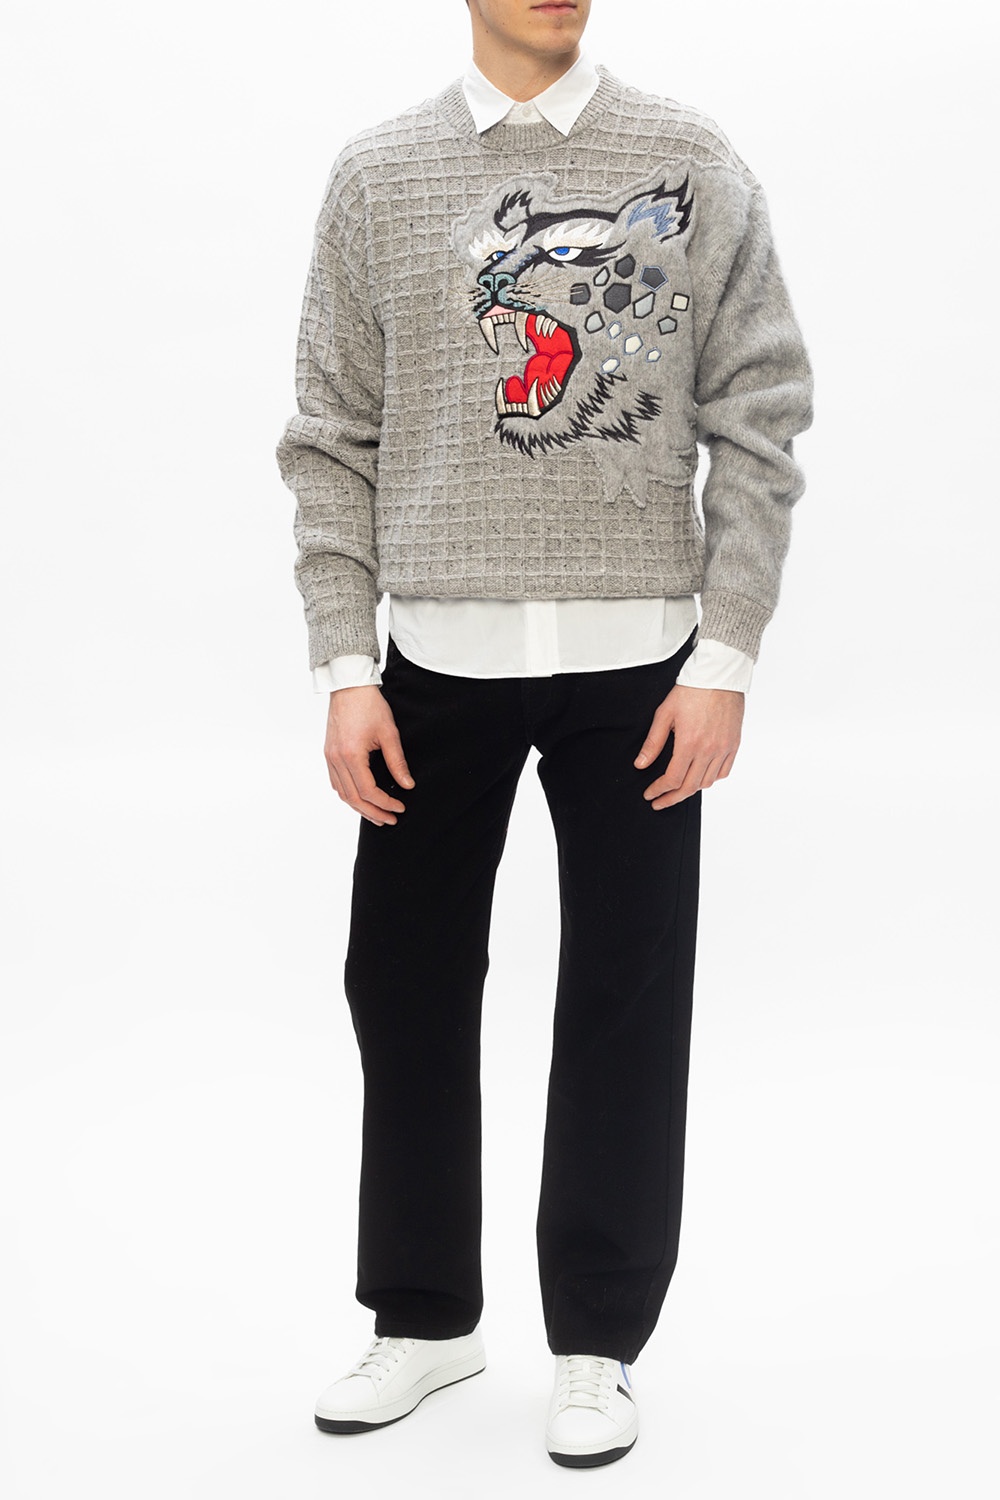 Kenzo Embroidered sweater | Men's Clothing | IetpShops